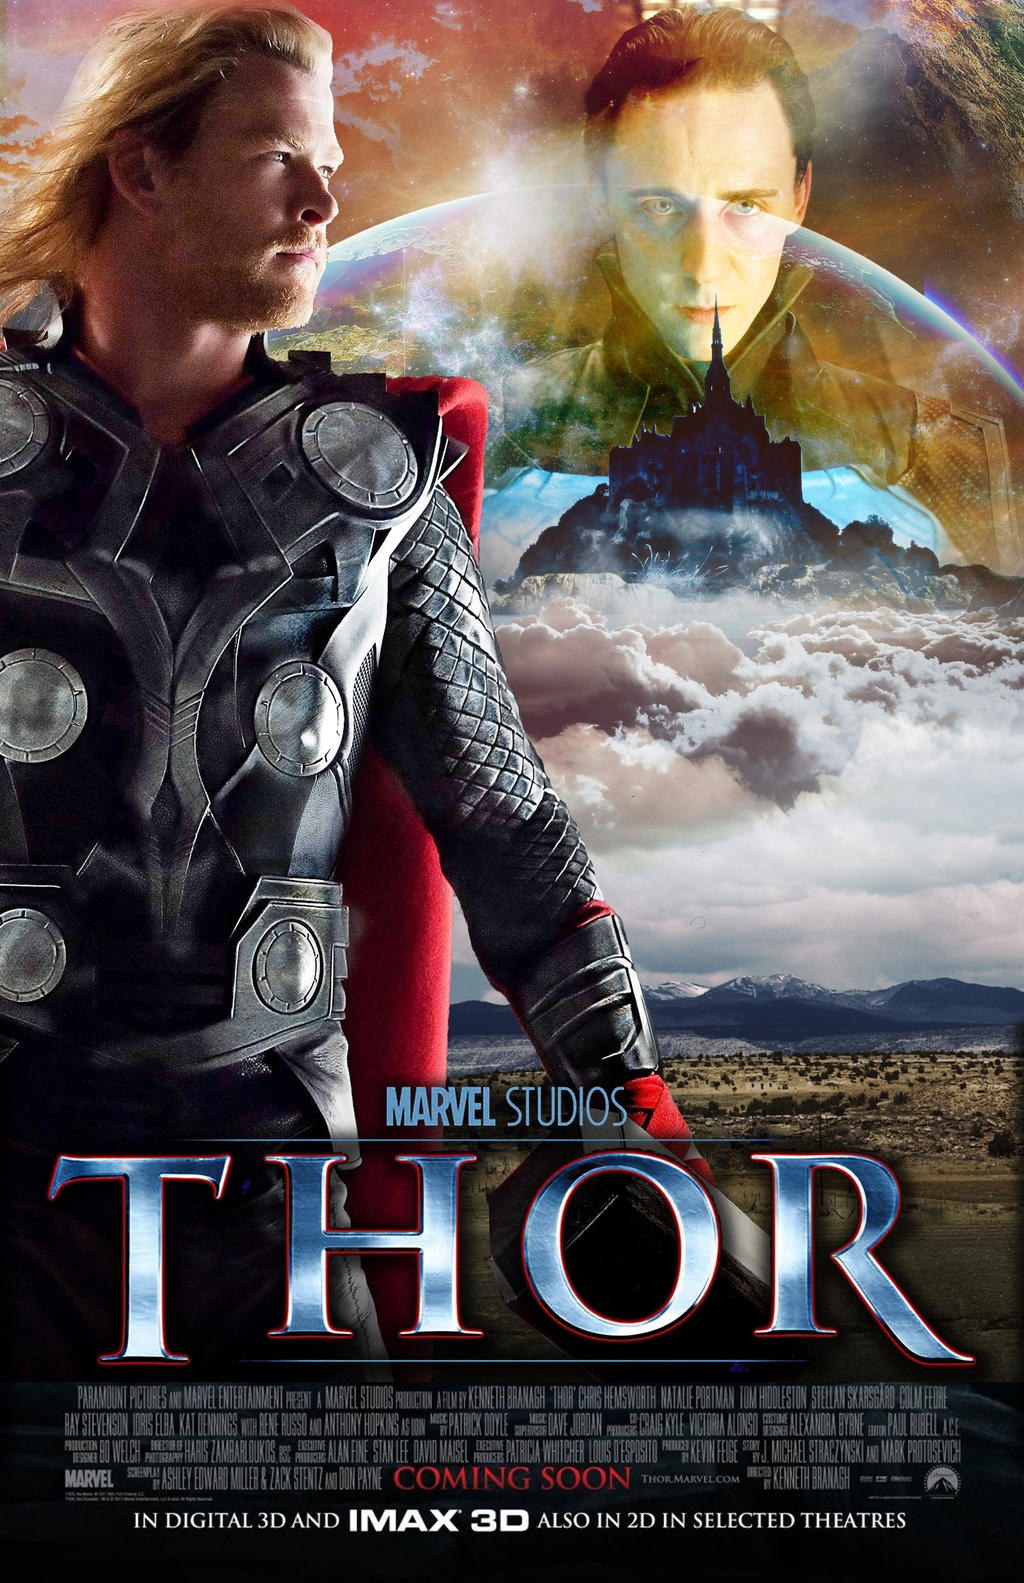 Thor Movie Poster by nicolehayley on DeviantArt